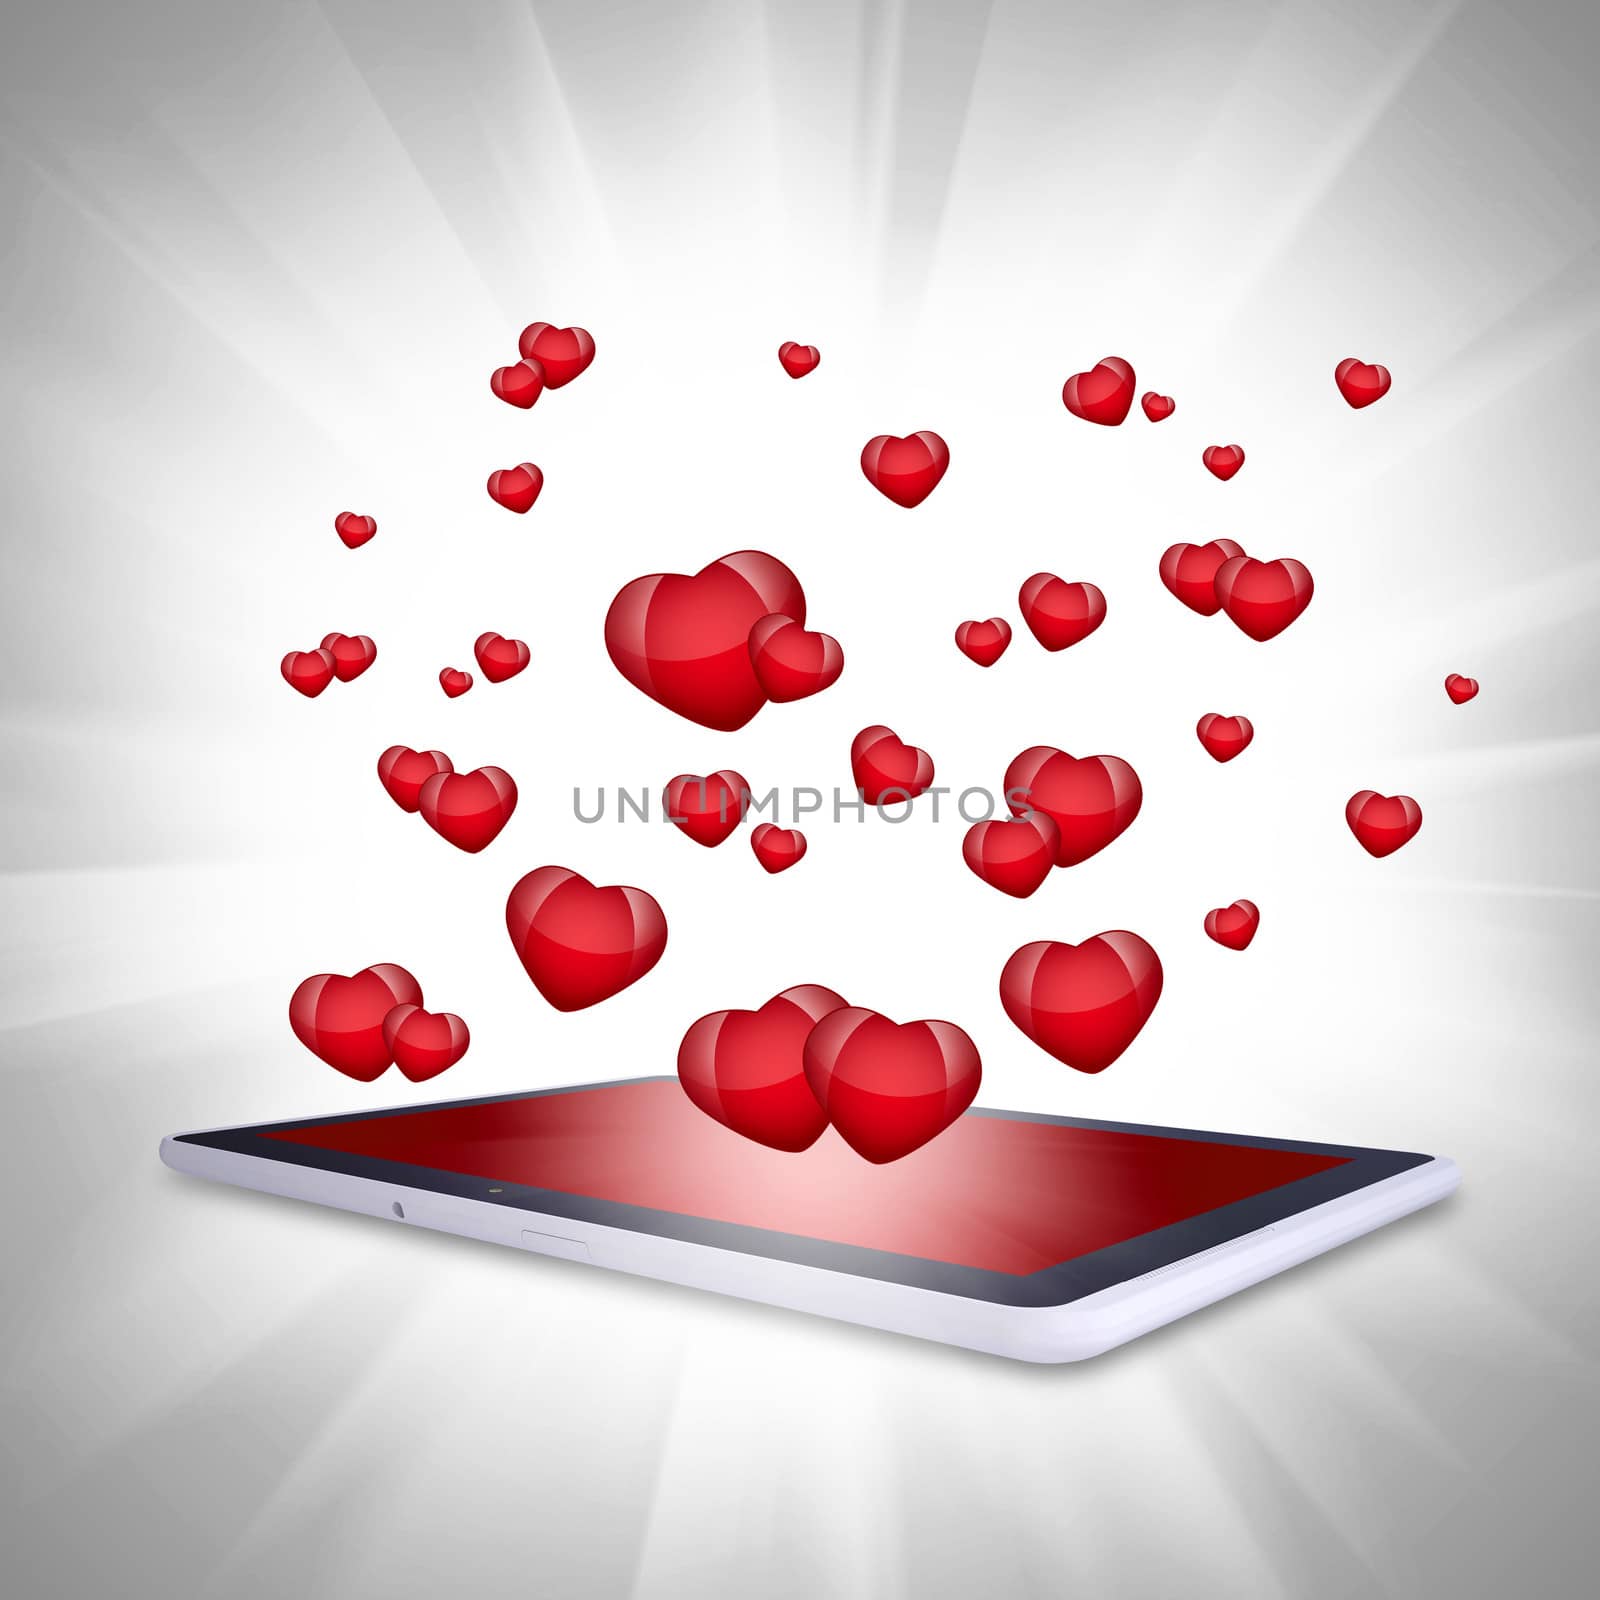 Red hearts fly out of the tablet PC. Computer technology concept on Valentine's Day